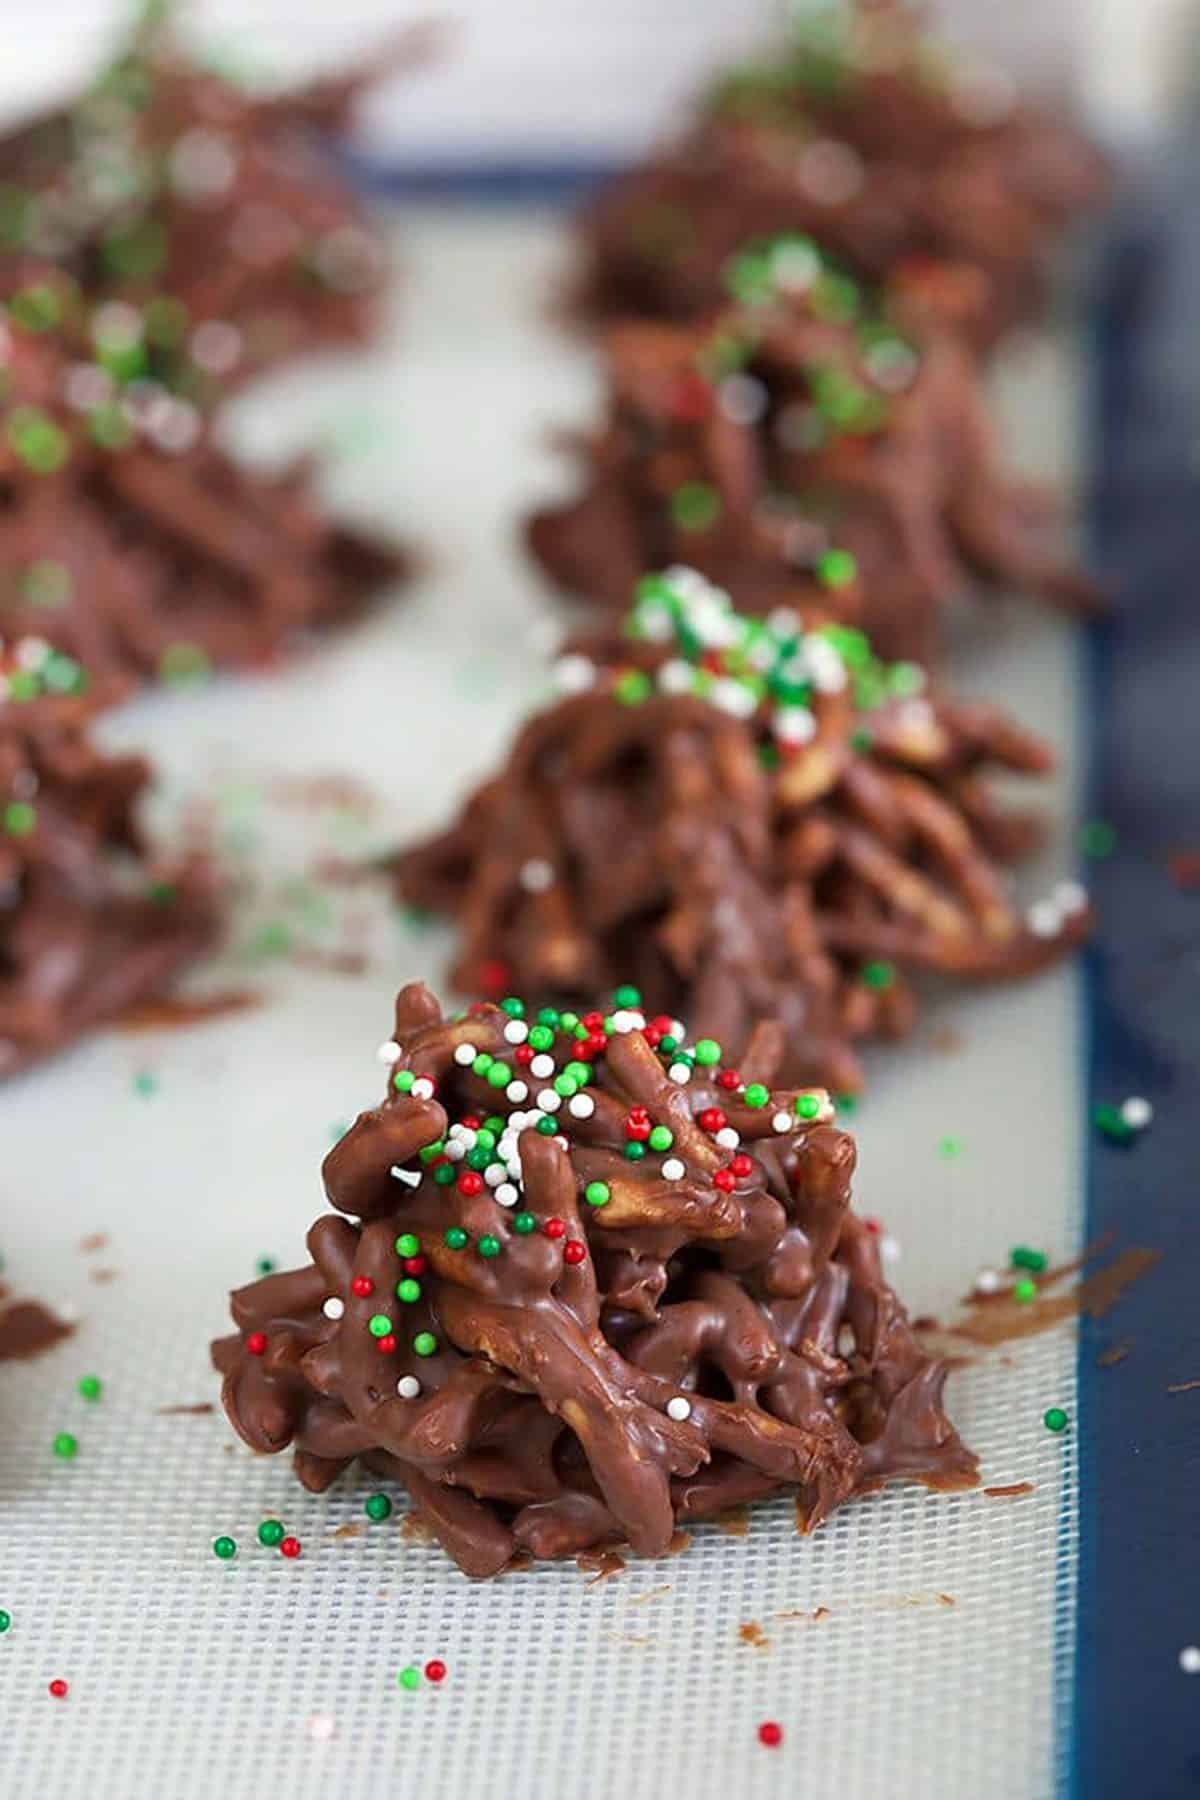 Chocolate haystack cookies on a baking sheet.